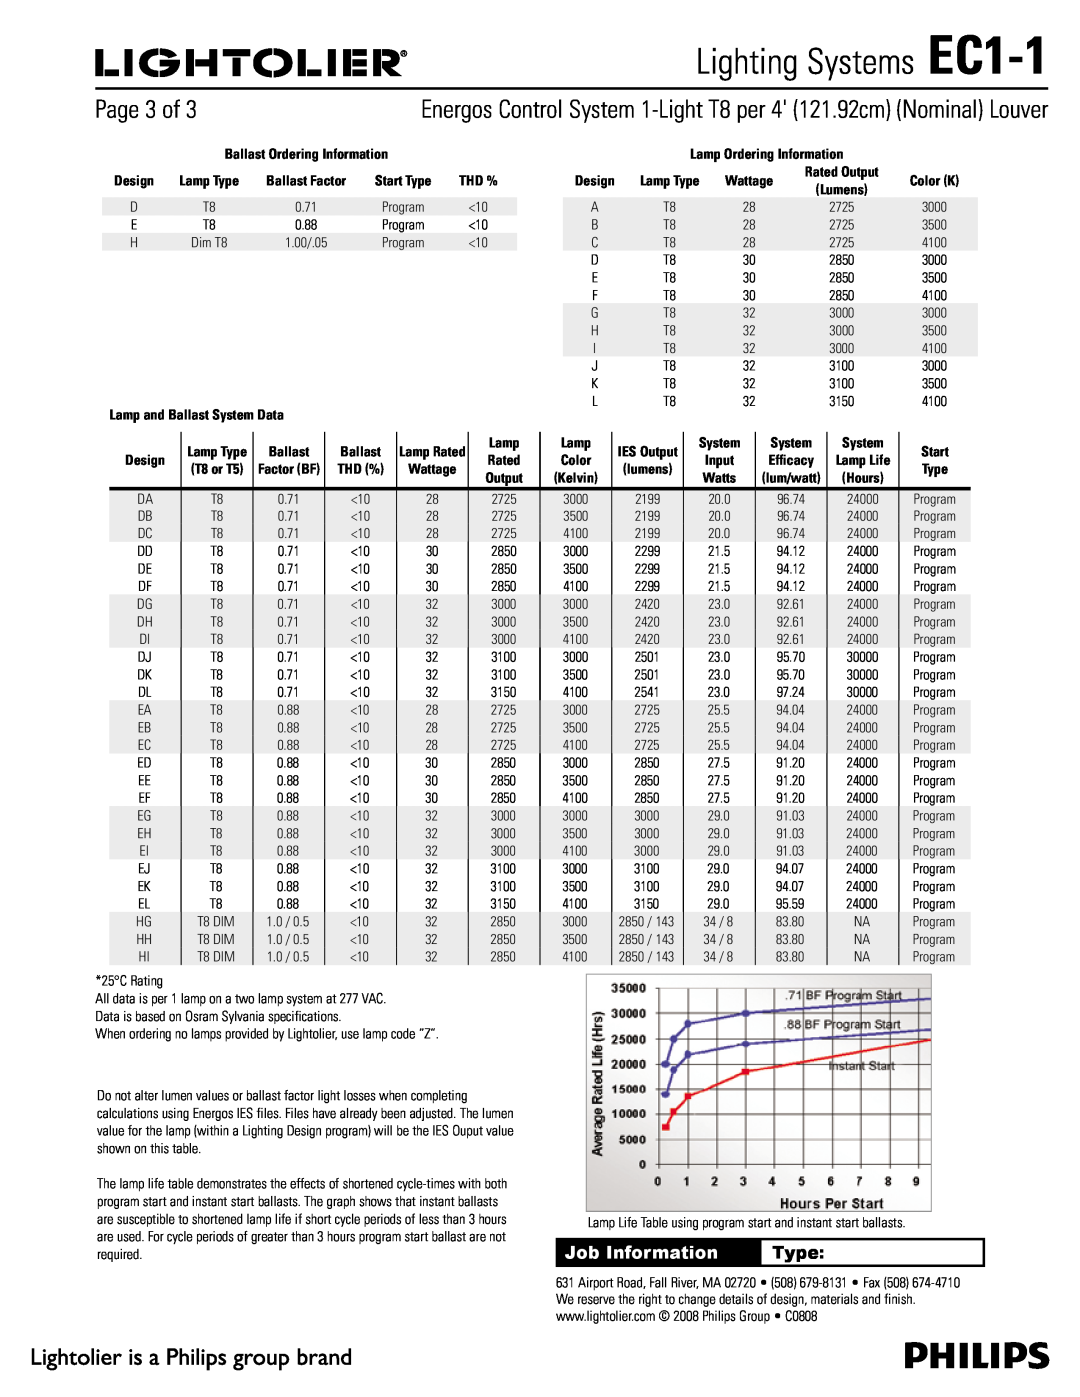 Lightolier specifications Page 3 of, Lighting Systems EC1-1, Job Information, Type, Lamp Ordering Information, Wattage 